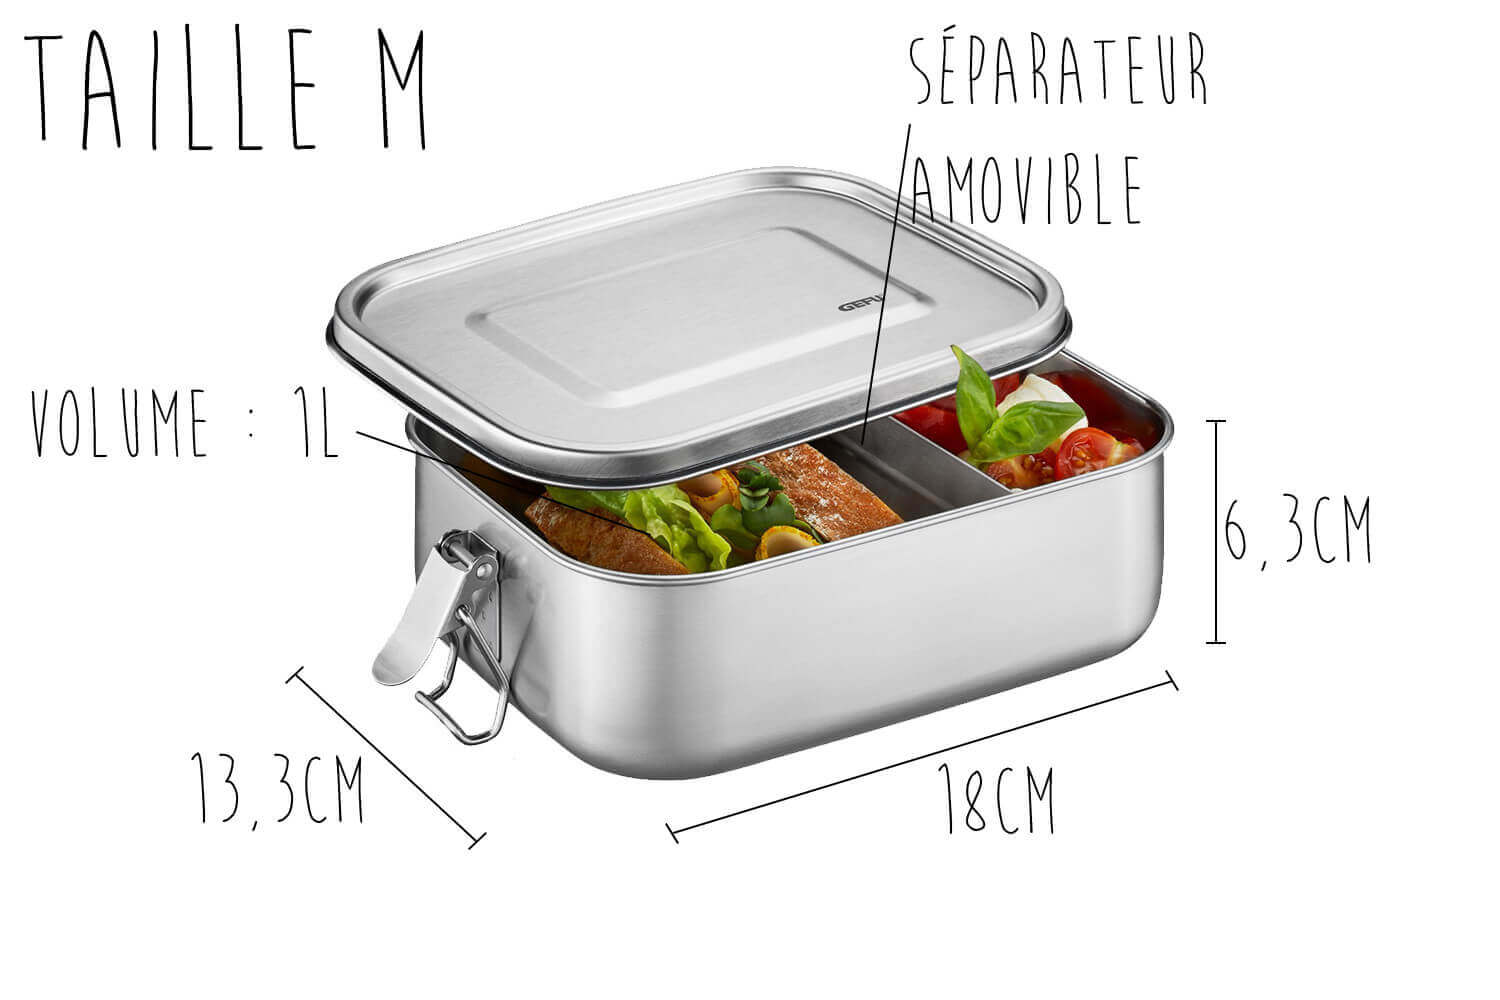 Coffret Lunch Box Isotherme